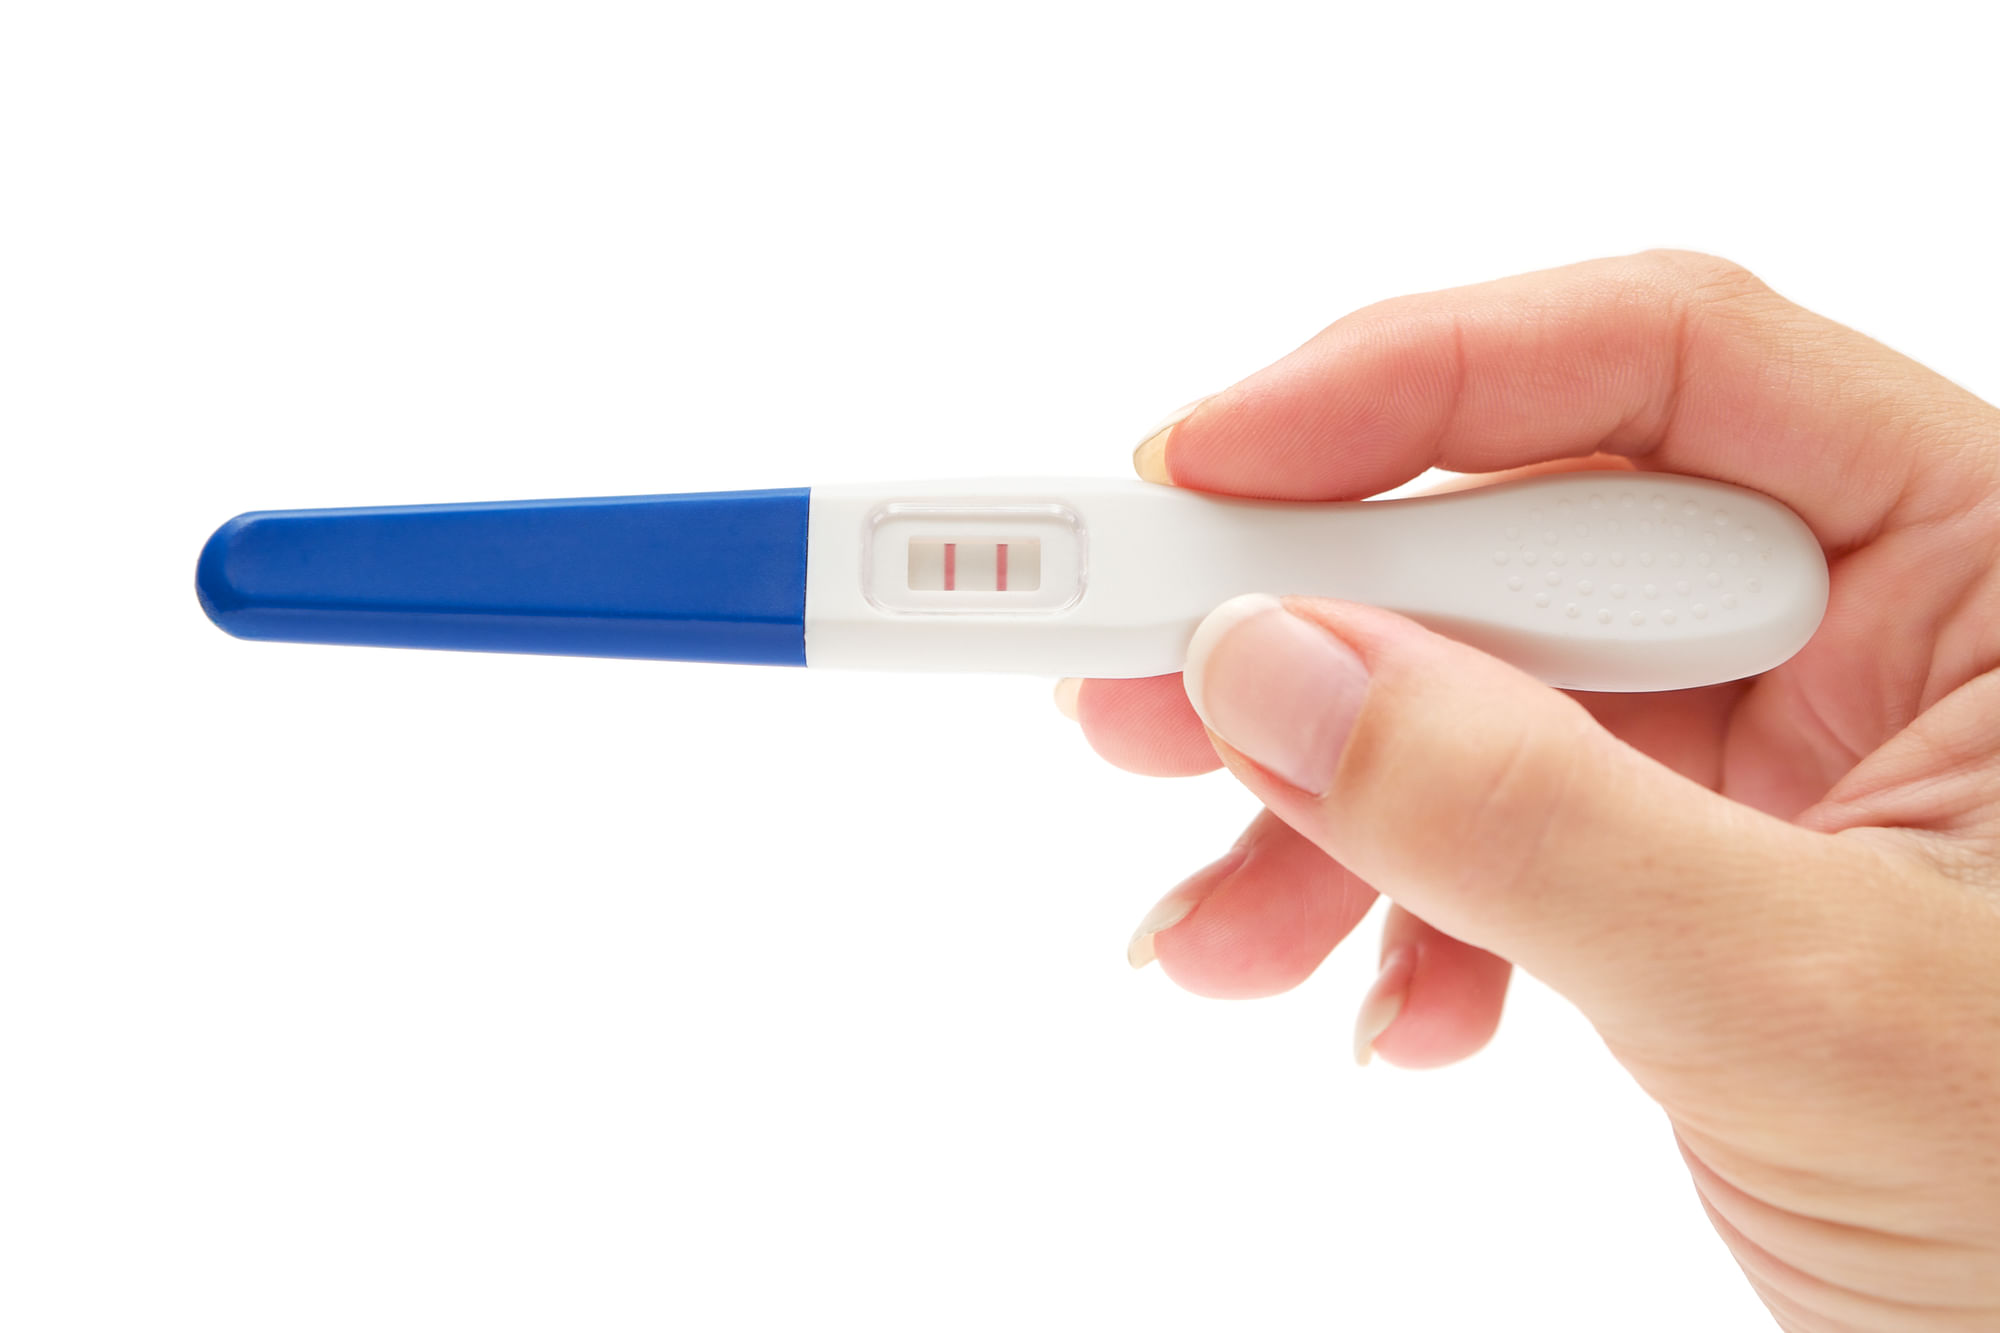 A standard home pregnancy test will show two coloured lines in case of pregnancy